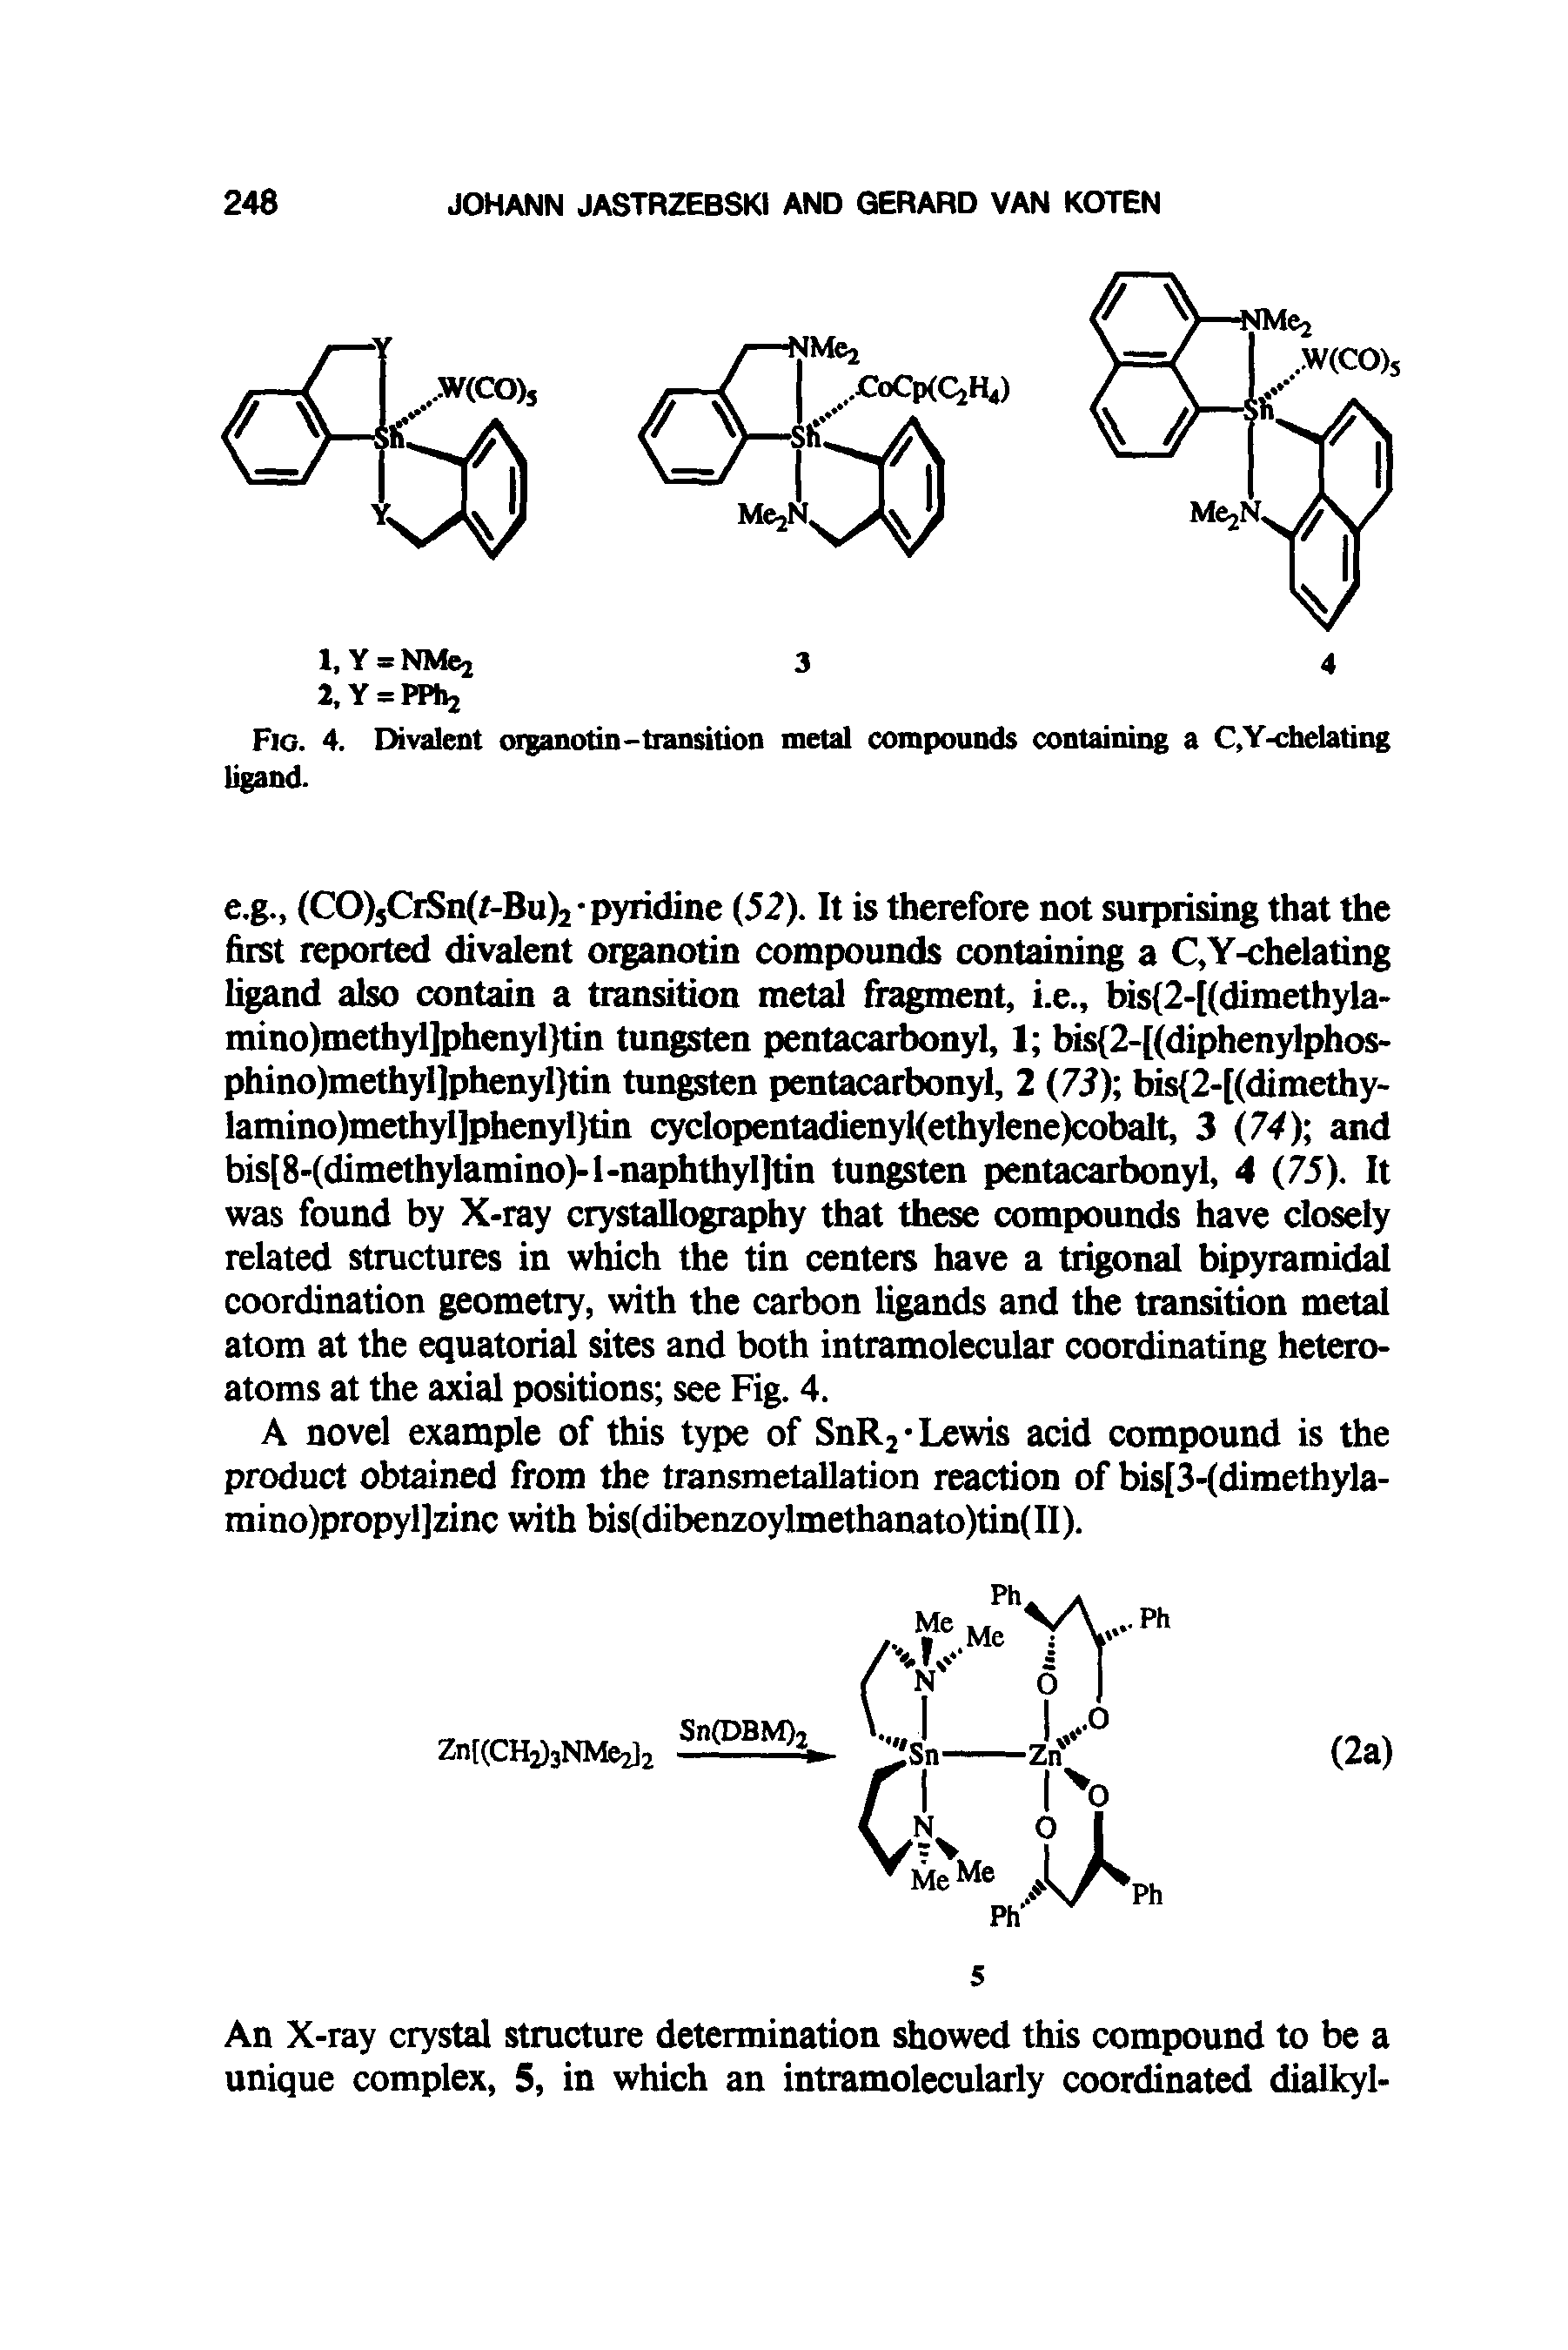 Fig. 4. Divalent organotin - transition metal compounds containing a C,Y-chelating ligand.